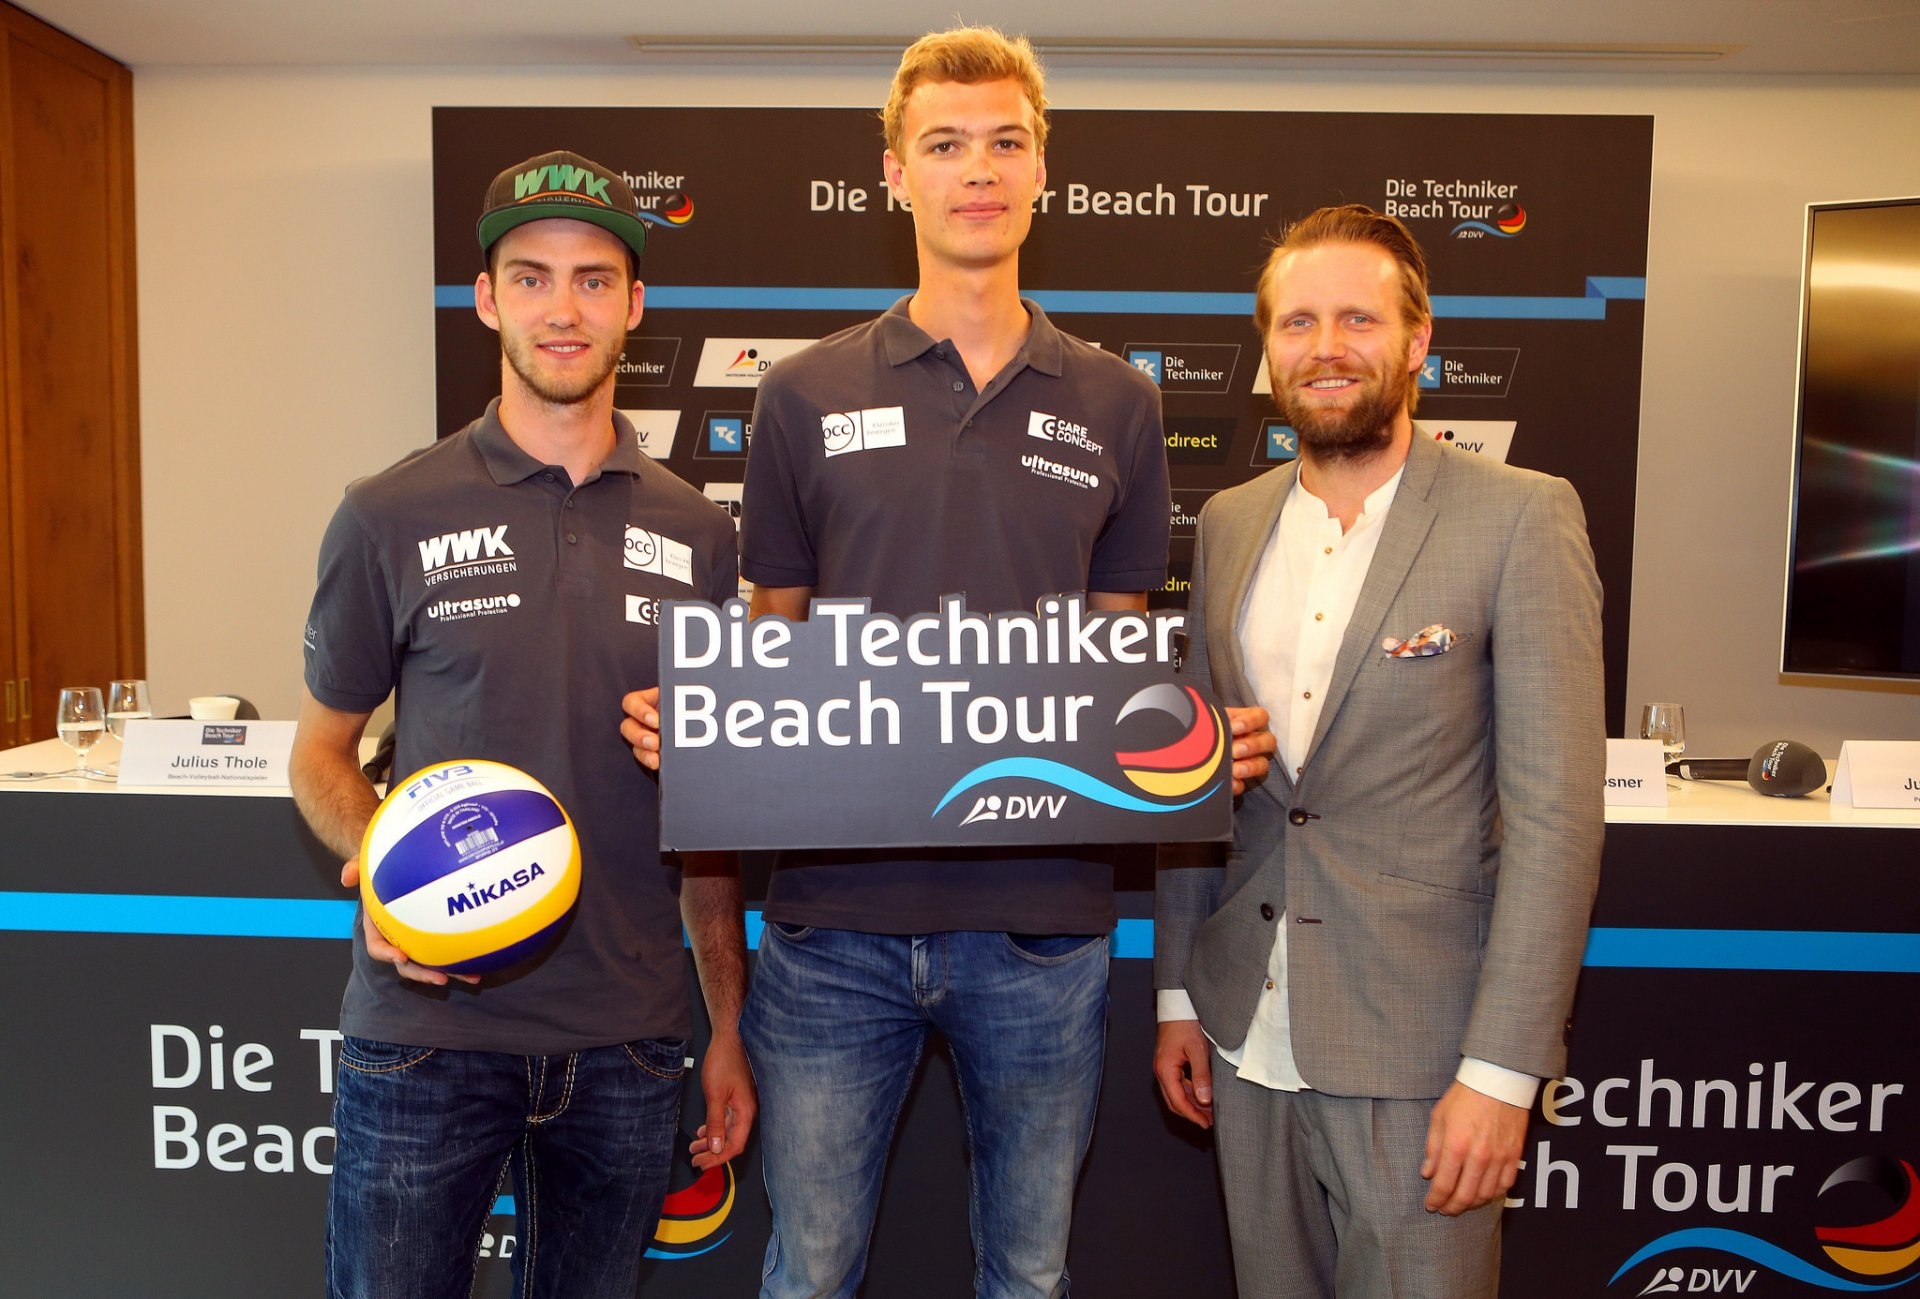 Wickler and Thole pose with Julius Brink, who is a mentor for the team (Photocredit: Die Techniker Beach Tour)